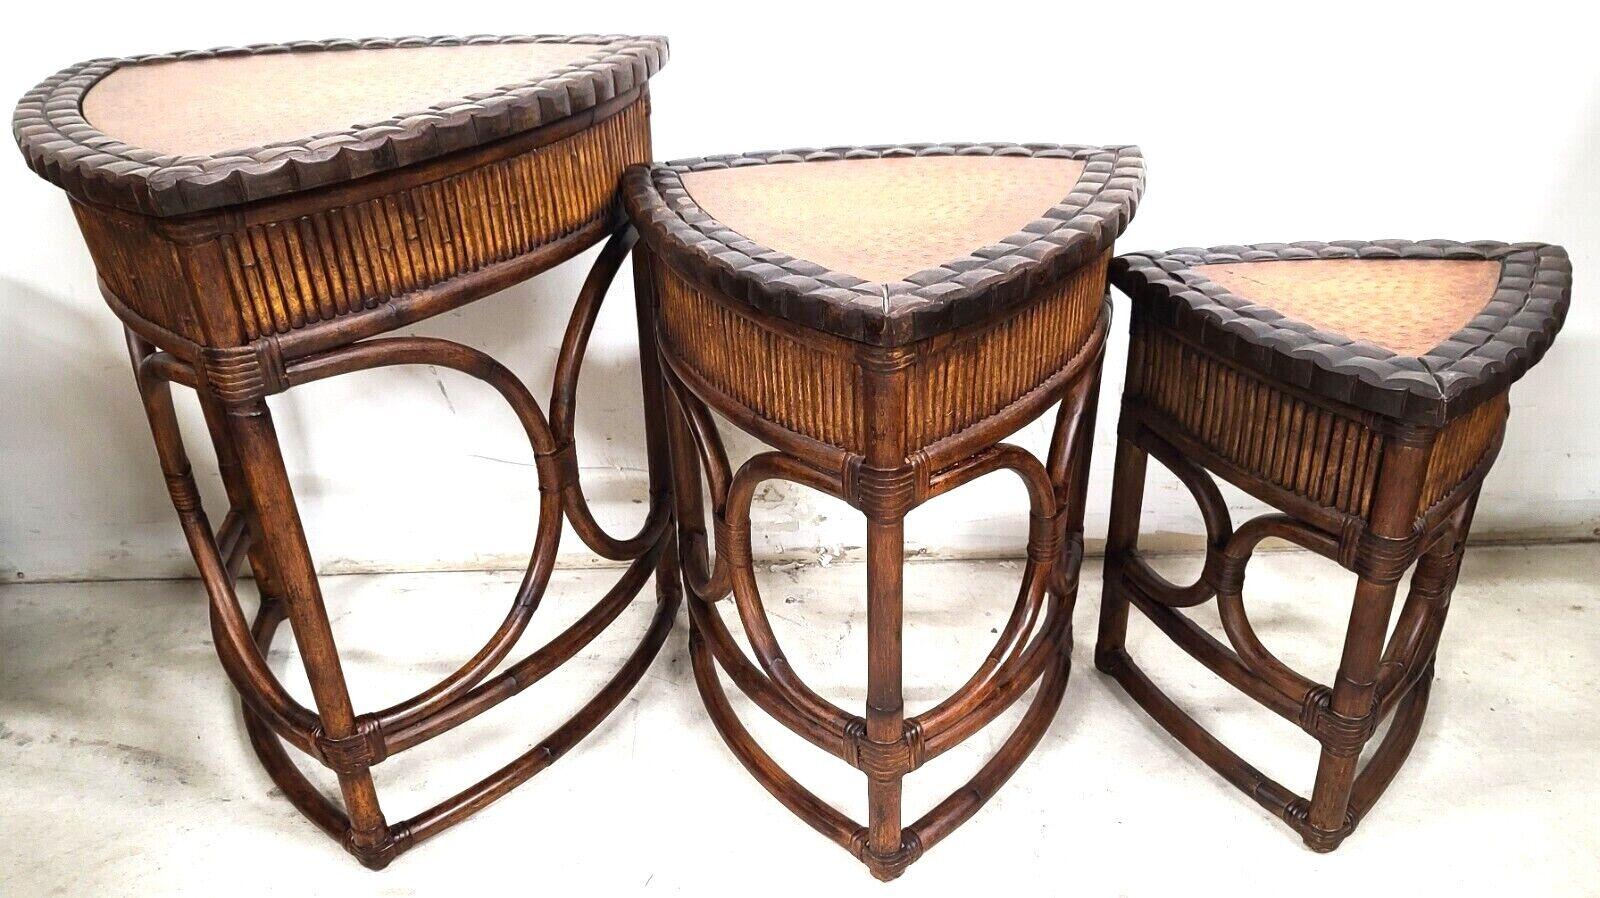 Vintage Bamboo Rattan Coconut Shell Ostrich Nesting Tables, Set of 3 For Sale 5